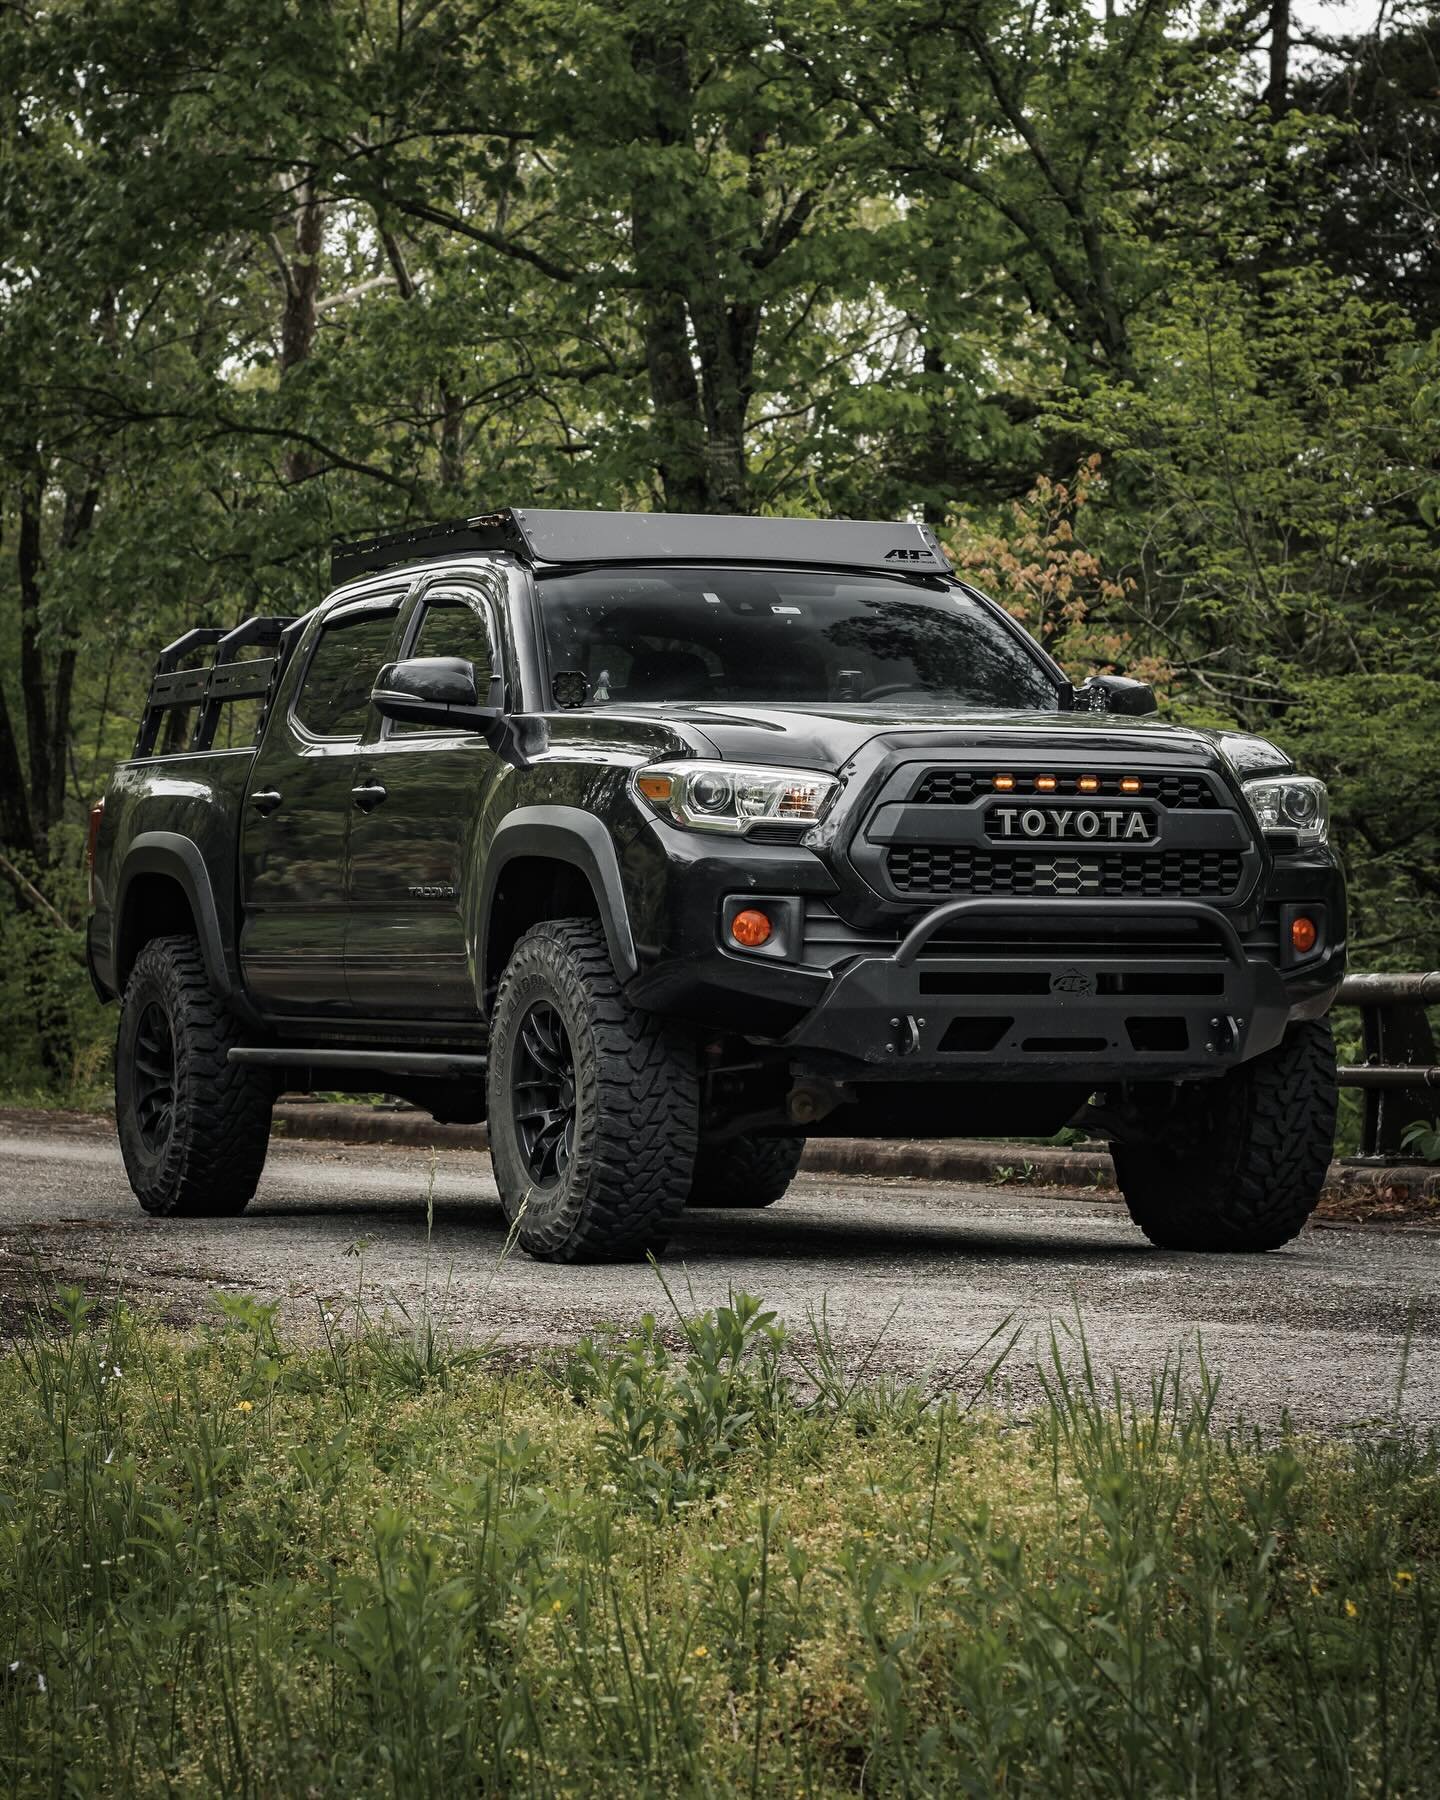 TRD On-Road 🛣️

See you all tomorrow at @rigscoffee_nwa - be there or else..

#trucks #trucksofinstagram #toyota #tacoma #trdoffroad #overlanding #overland #toyotagram #tacomabeast #allprooffroad #trailtacoma #yotaforce #yota #tacomamods #outdoorlif